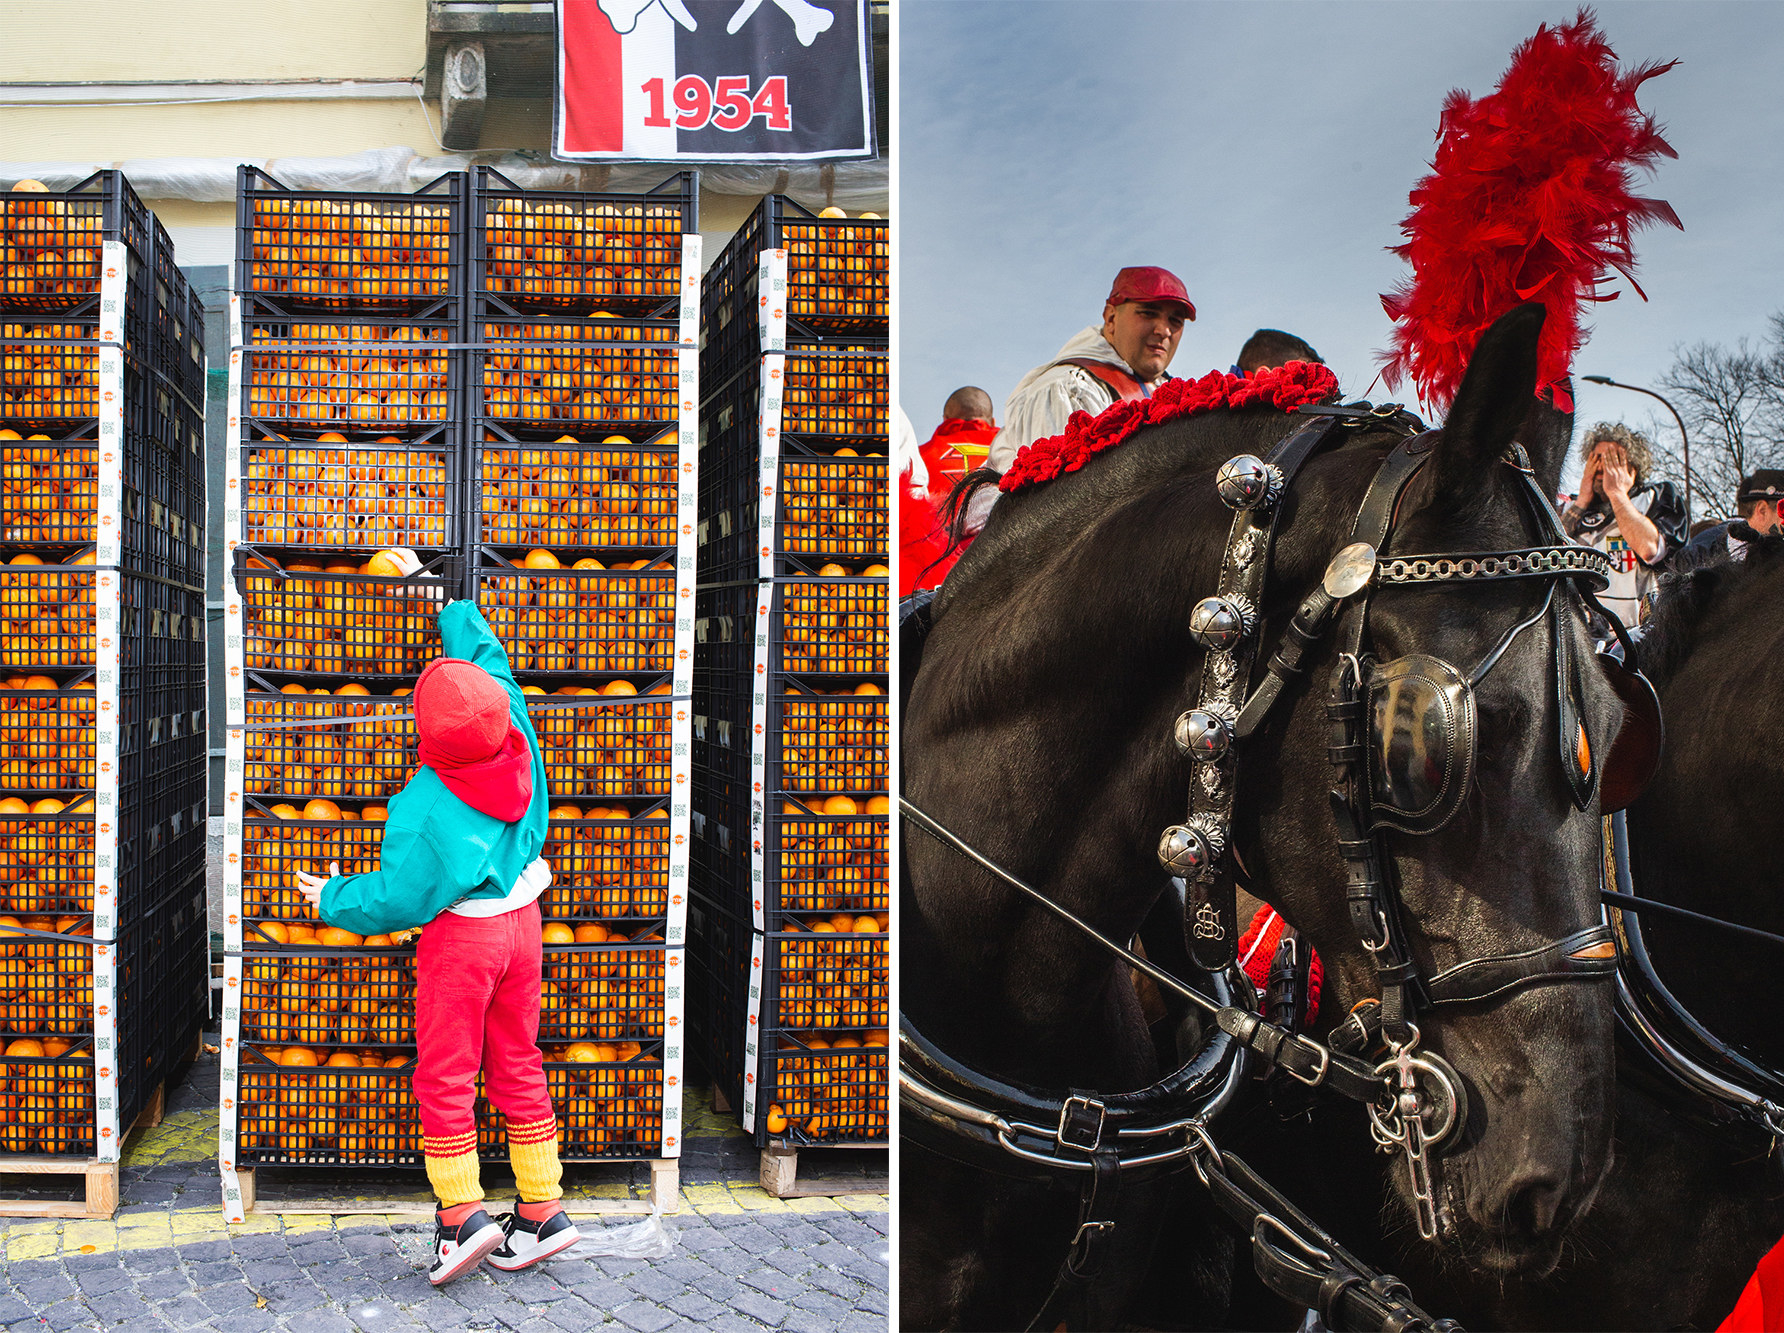 A side-by-side depicts a young child standing on tip toes to reach into a basket, which are stacked at twice their height; the image on the right shows a black horse wearing blinders, red feathers, and bells